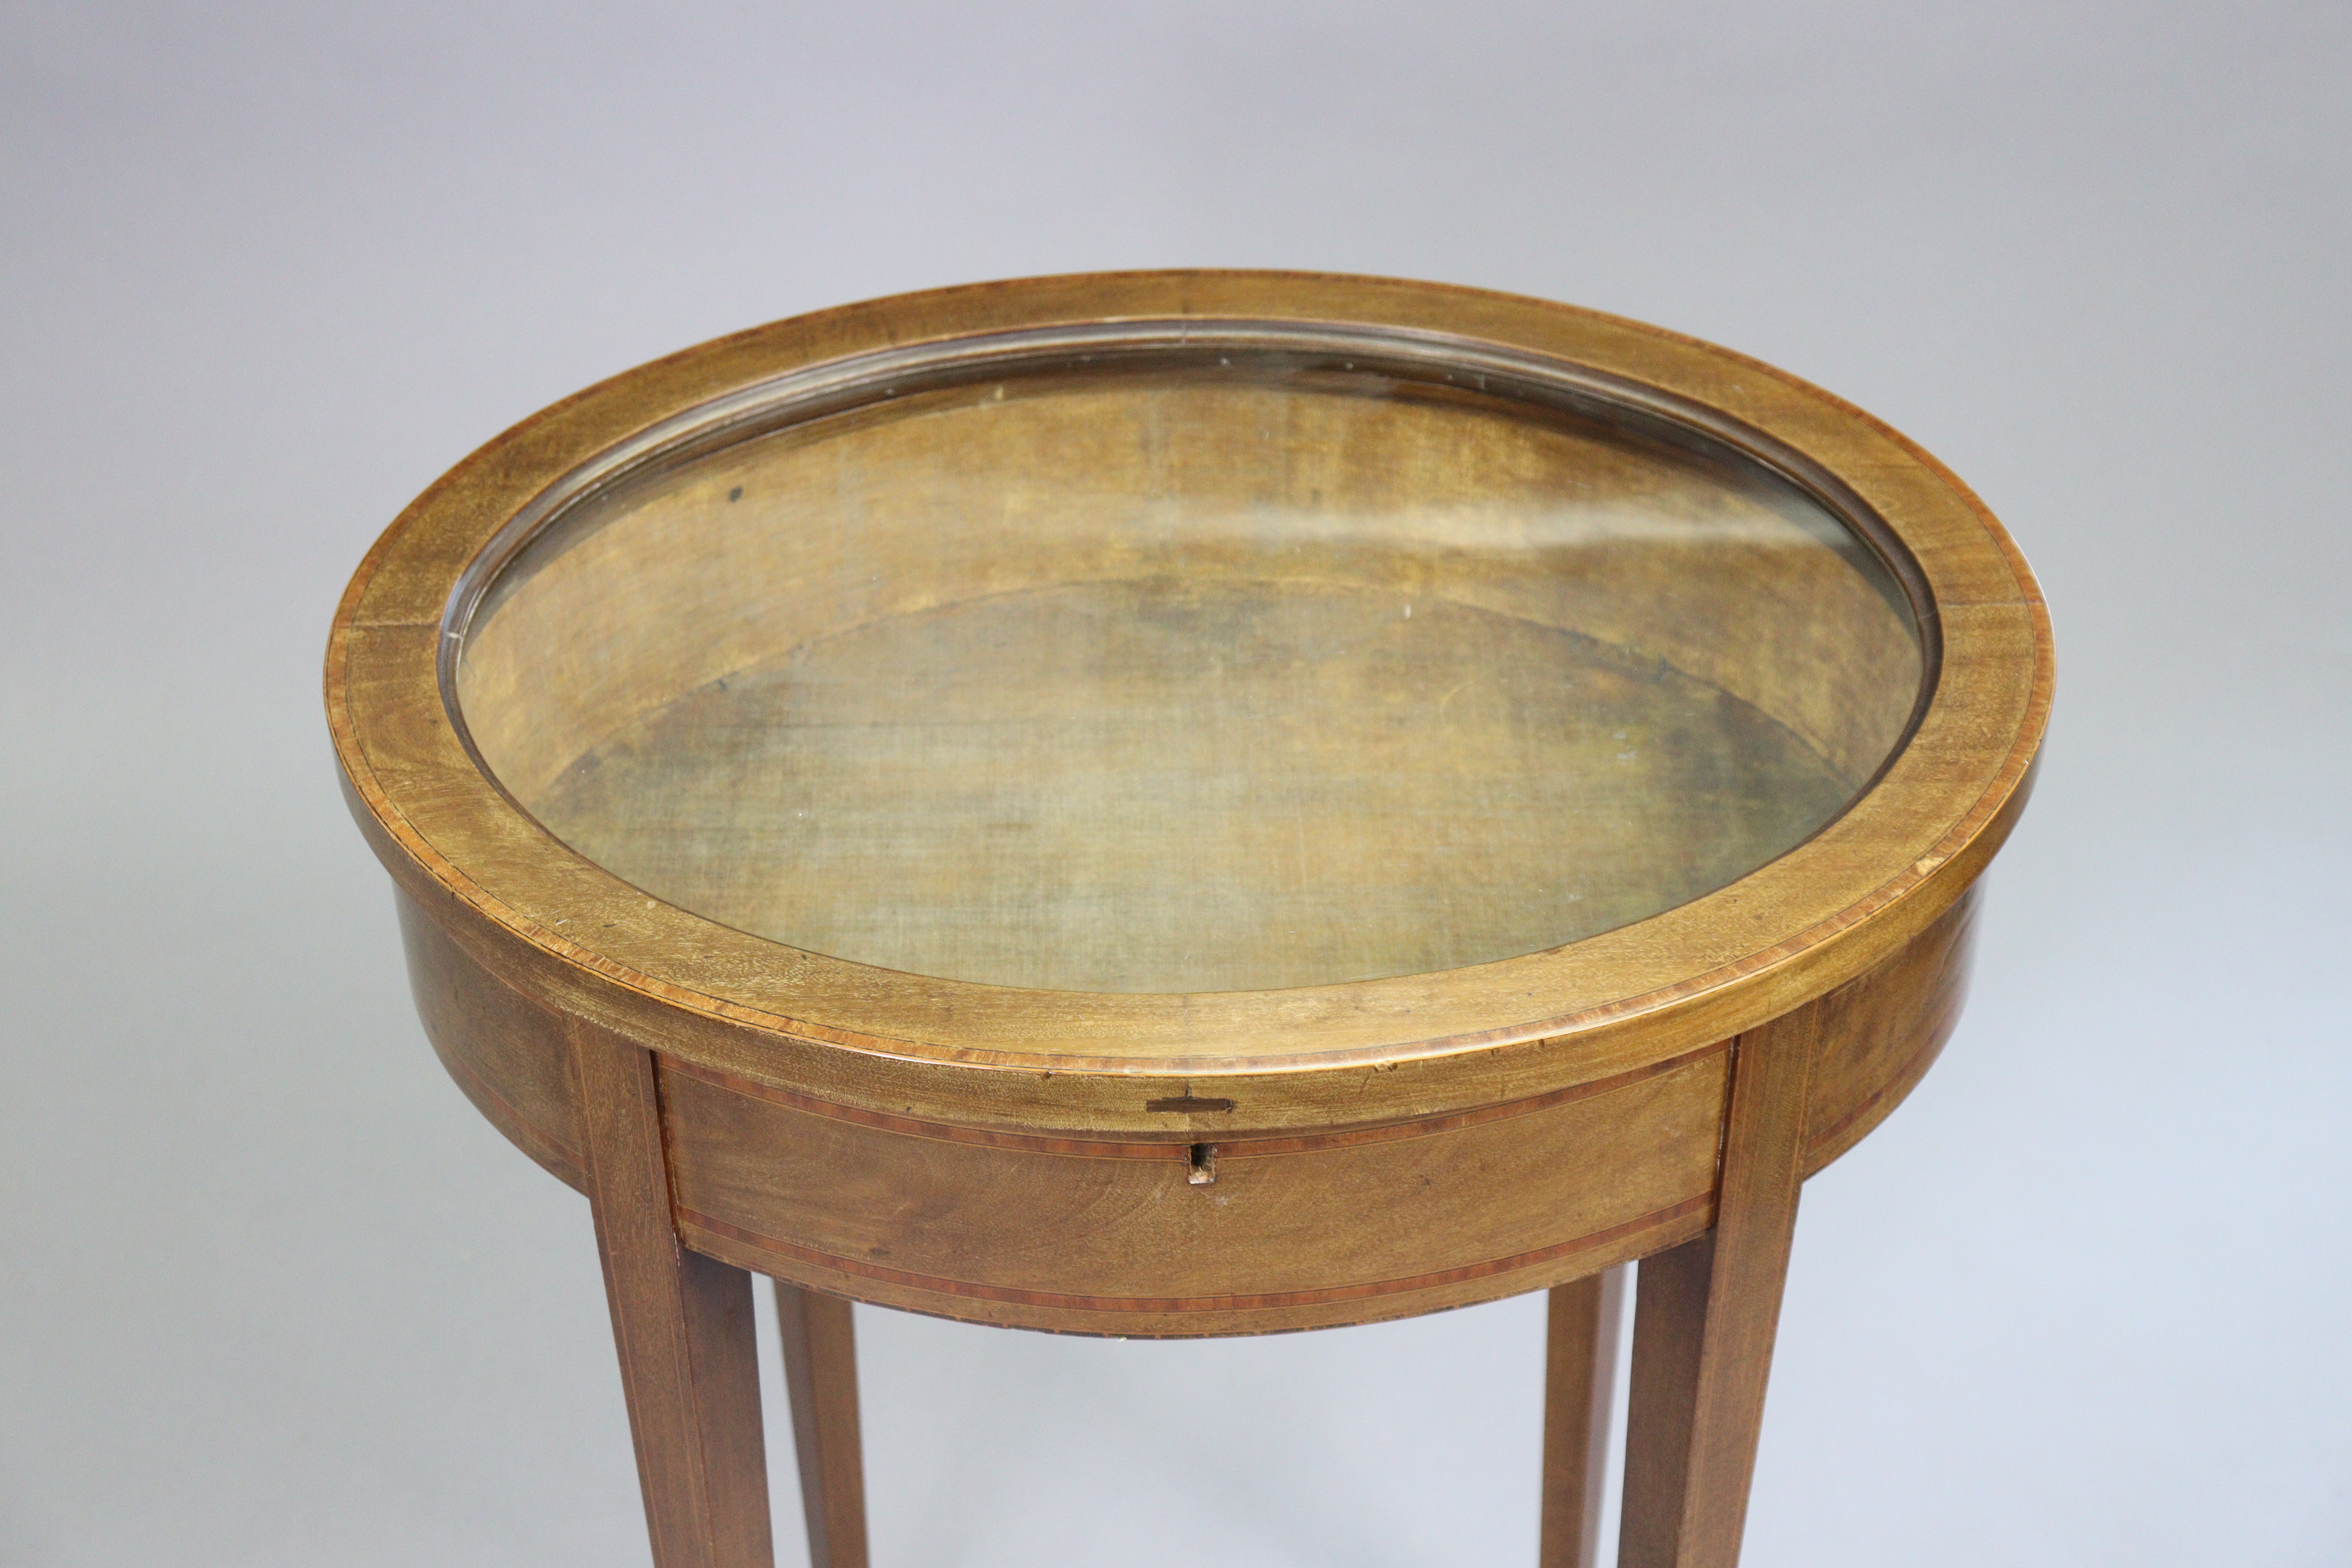 A 19th century inlaid mahogany oval bijouterie table with old-gold velour lined interior enclosed by - Image 3 of 3